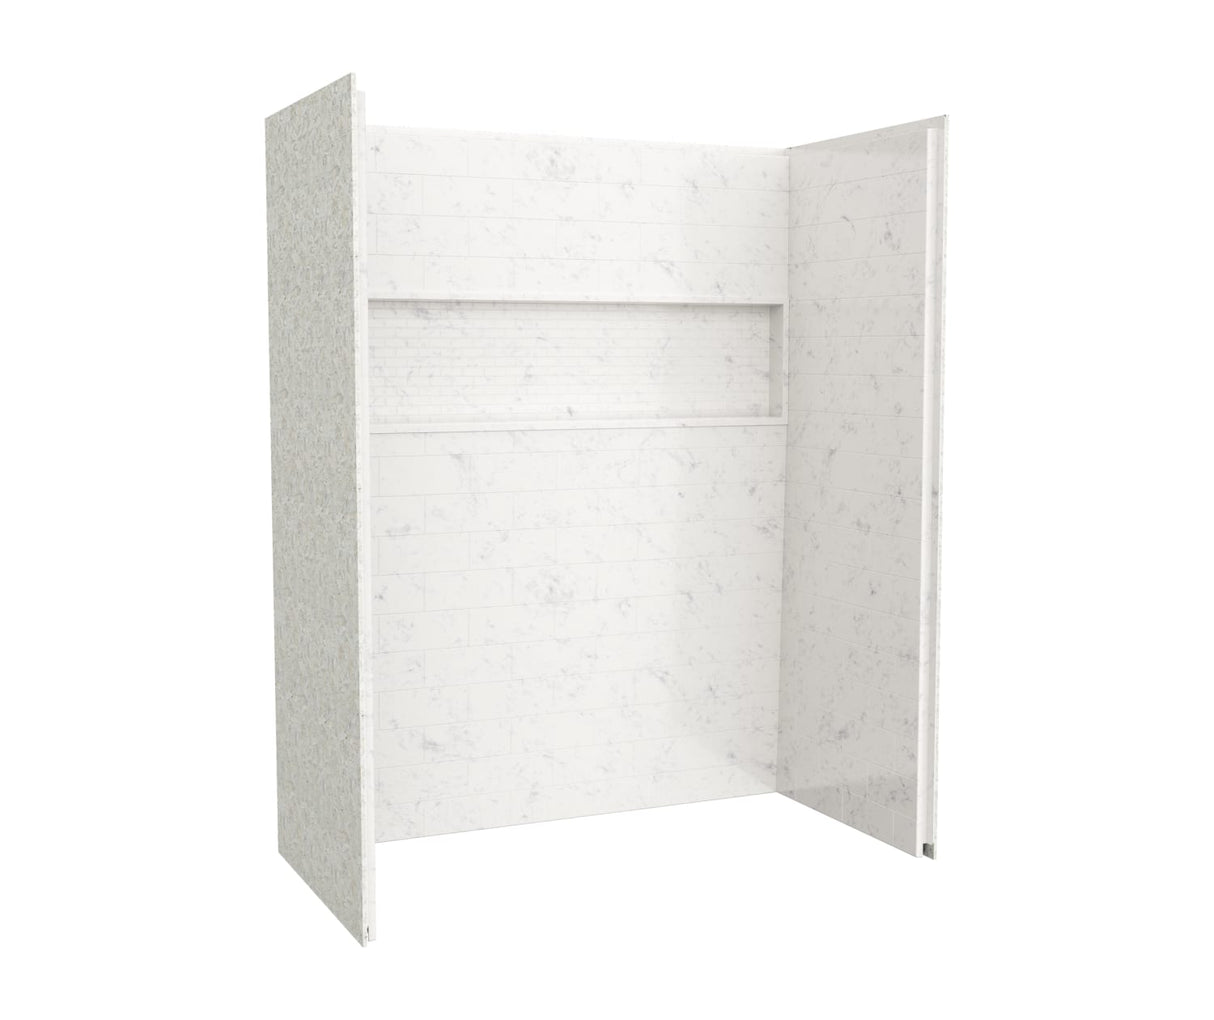 Swanstone NexTile 6030 Direct-to-Stud Four-Piece Alcove Shower Wall Kit in Carrara SE6030S.221